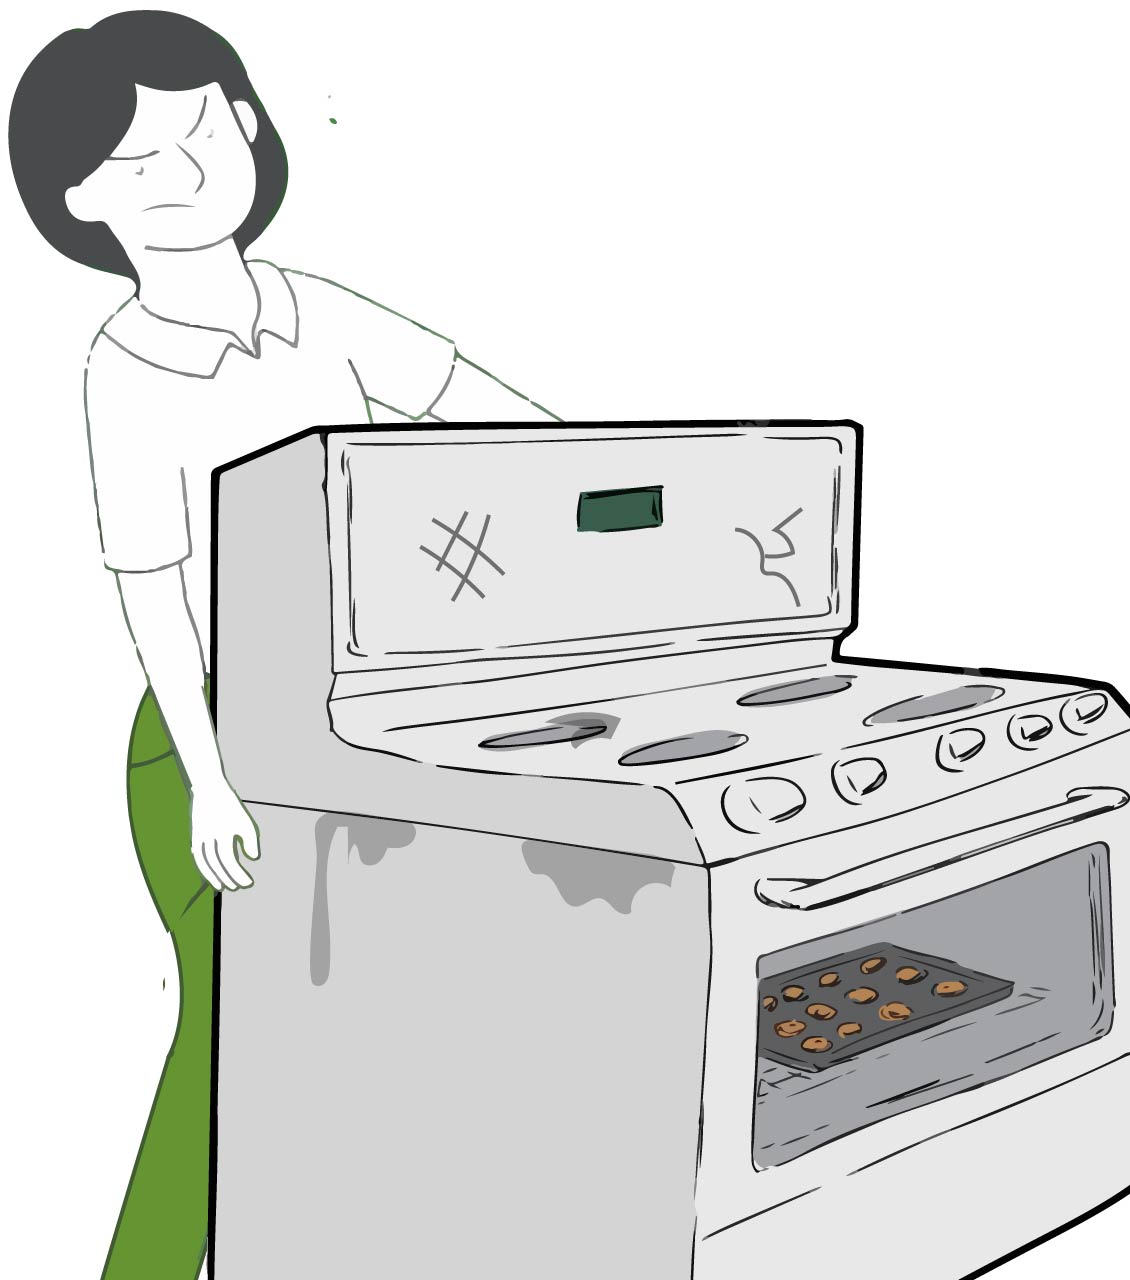 Chattanooga oven removal services